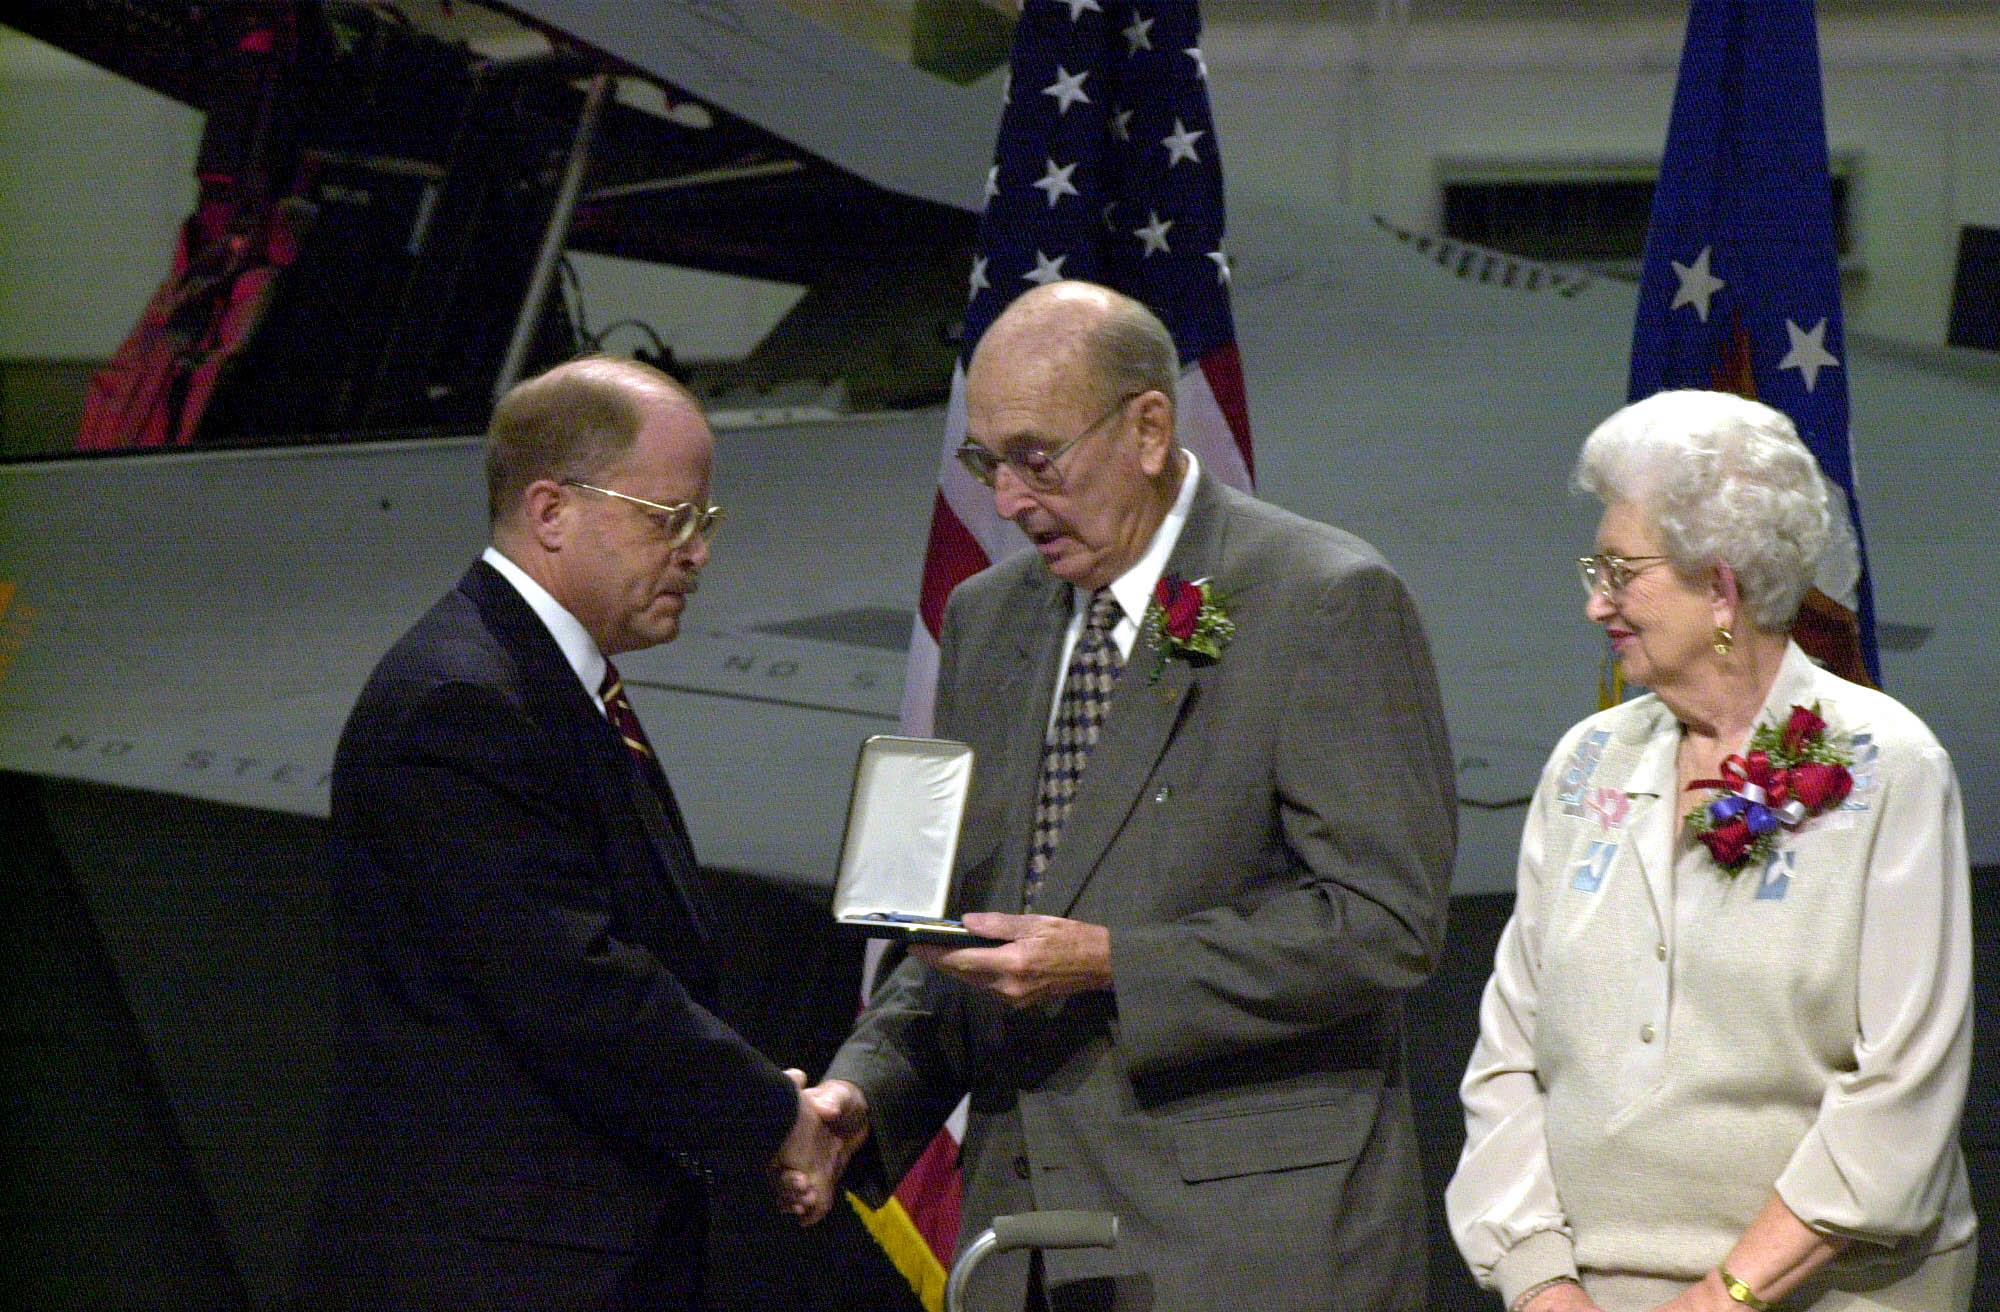 William F. Pitsenbarger Accepts the MOH for William H. Pitsenbarger